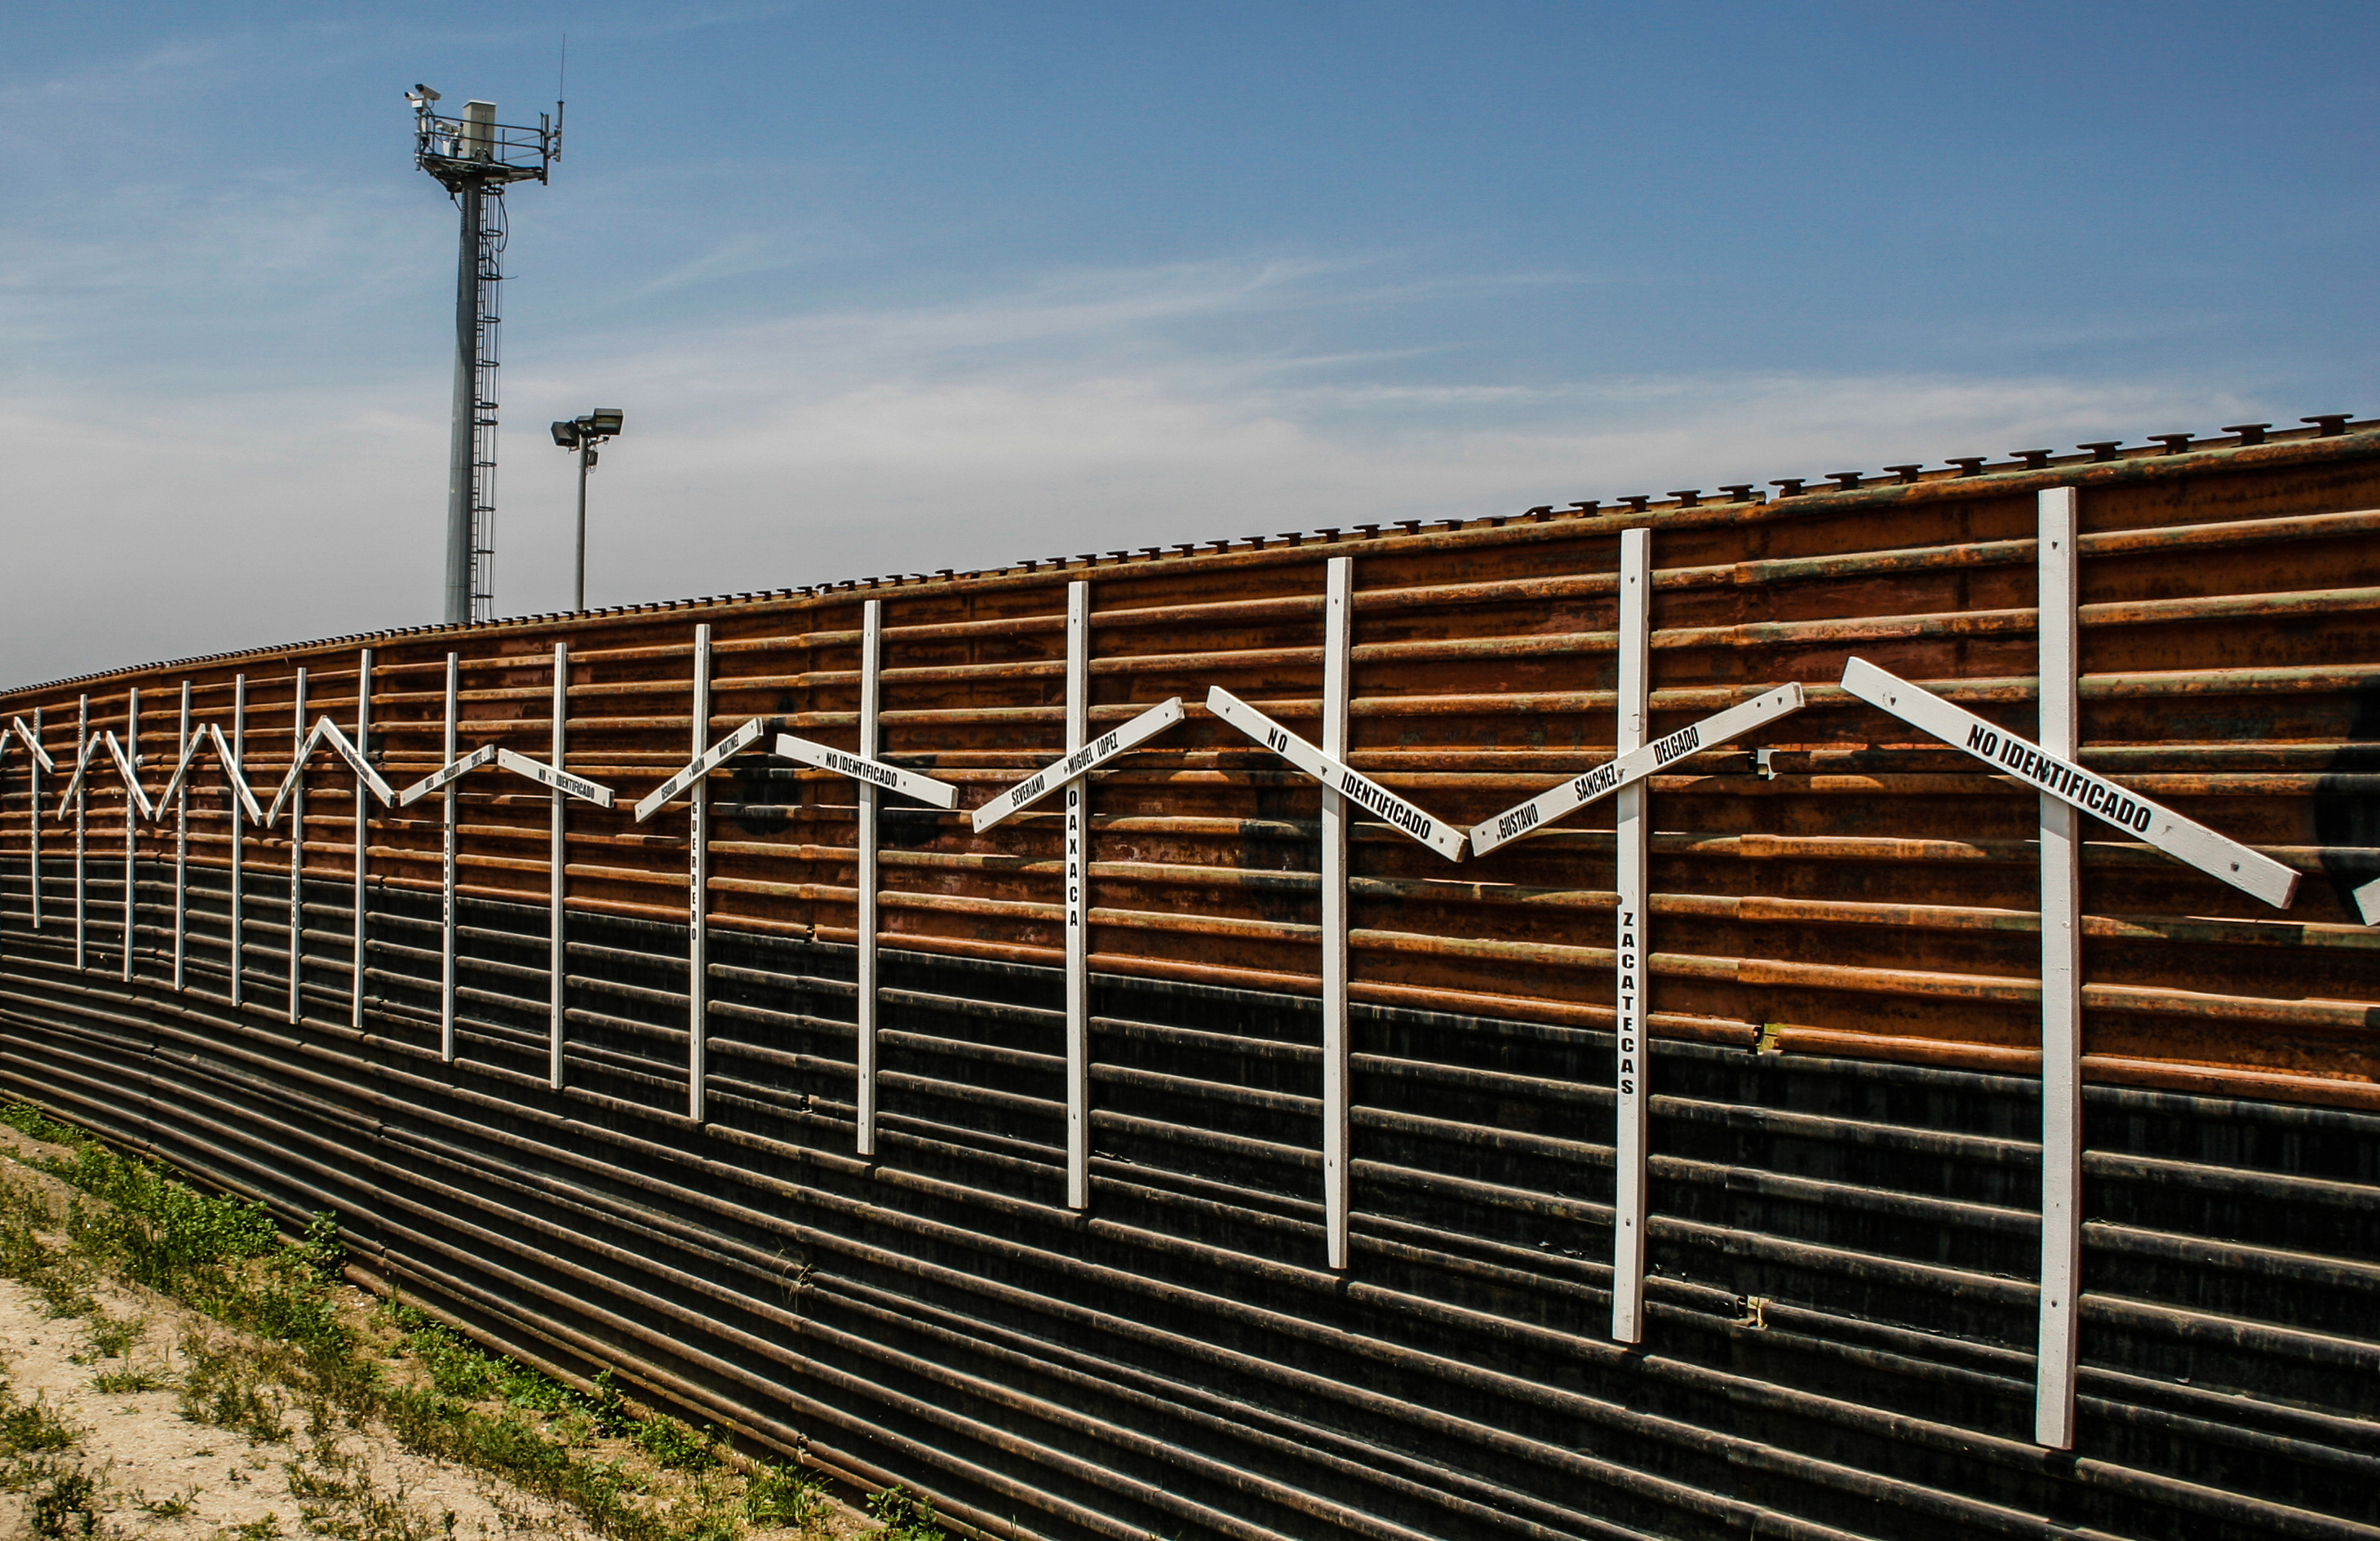 Federal judge blocks use of military funds for border wall